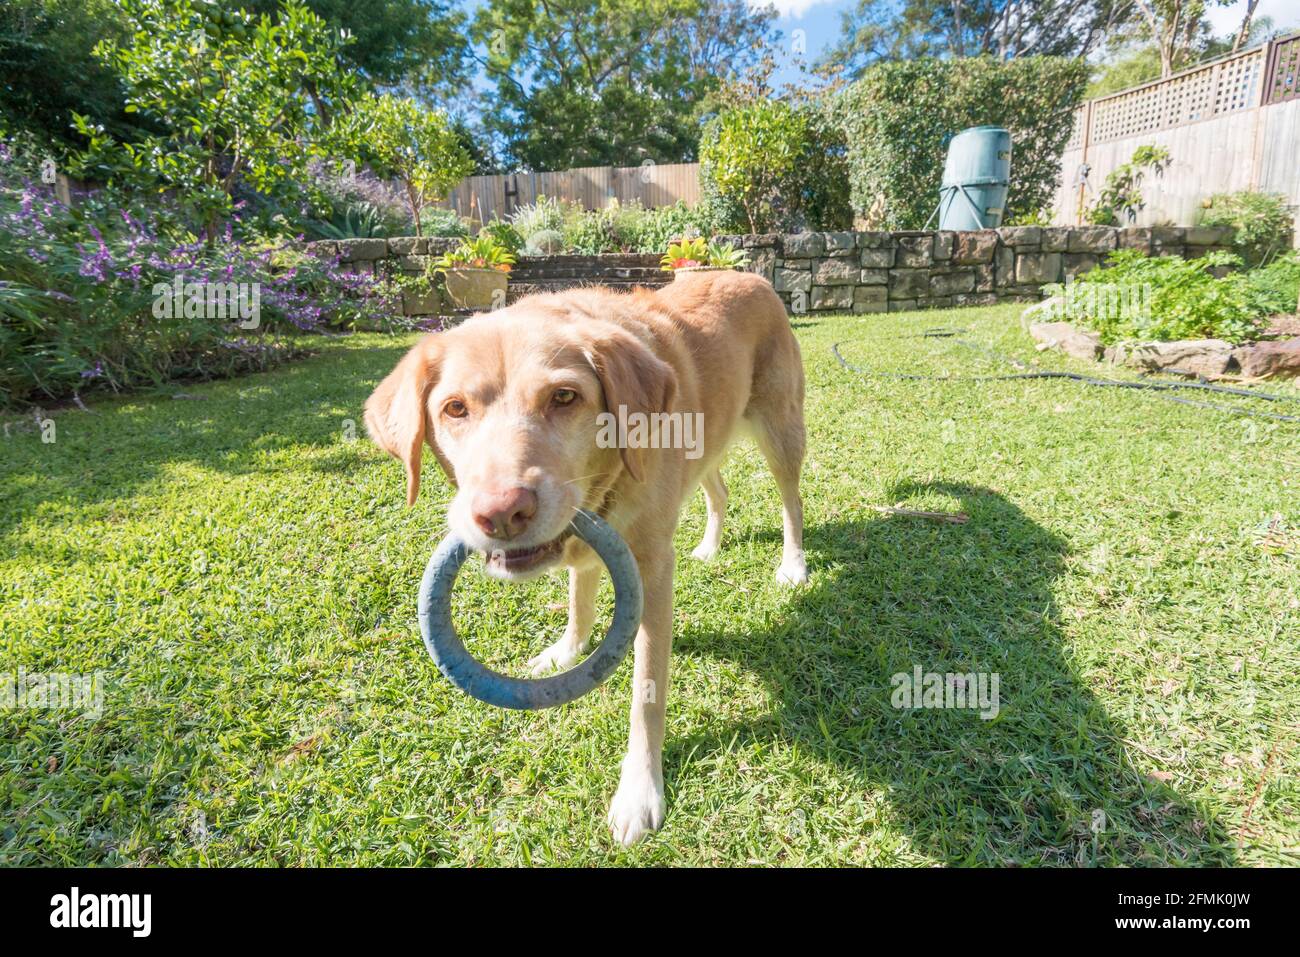 A middle-aged golden Labrador border collie cross dog in a Sydney, Australia backyard wanting to play with a rubber ring Stock Photo